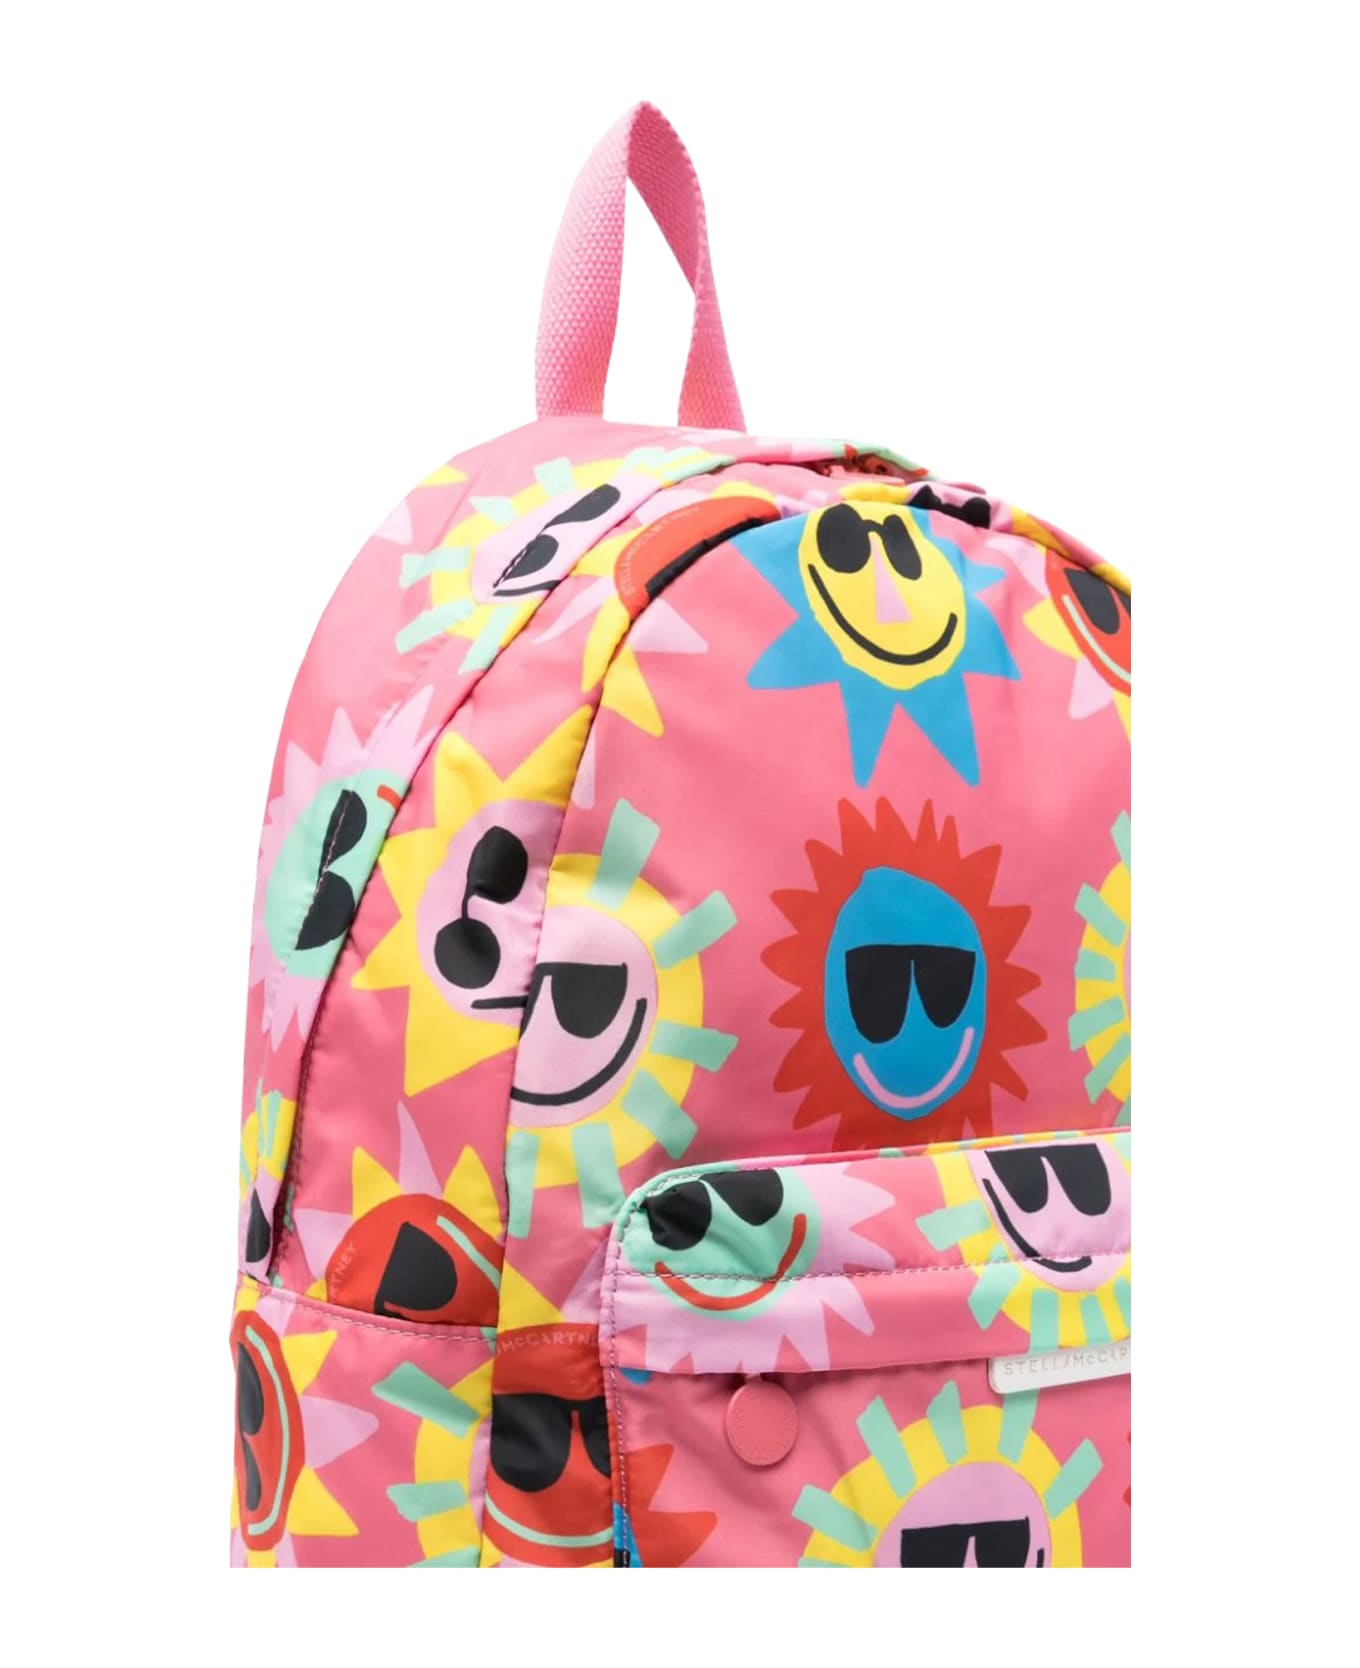 Stella McCartney Kids Backpack With Print - Multicolor アクセサリー＆ギフト